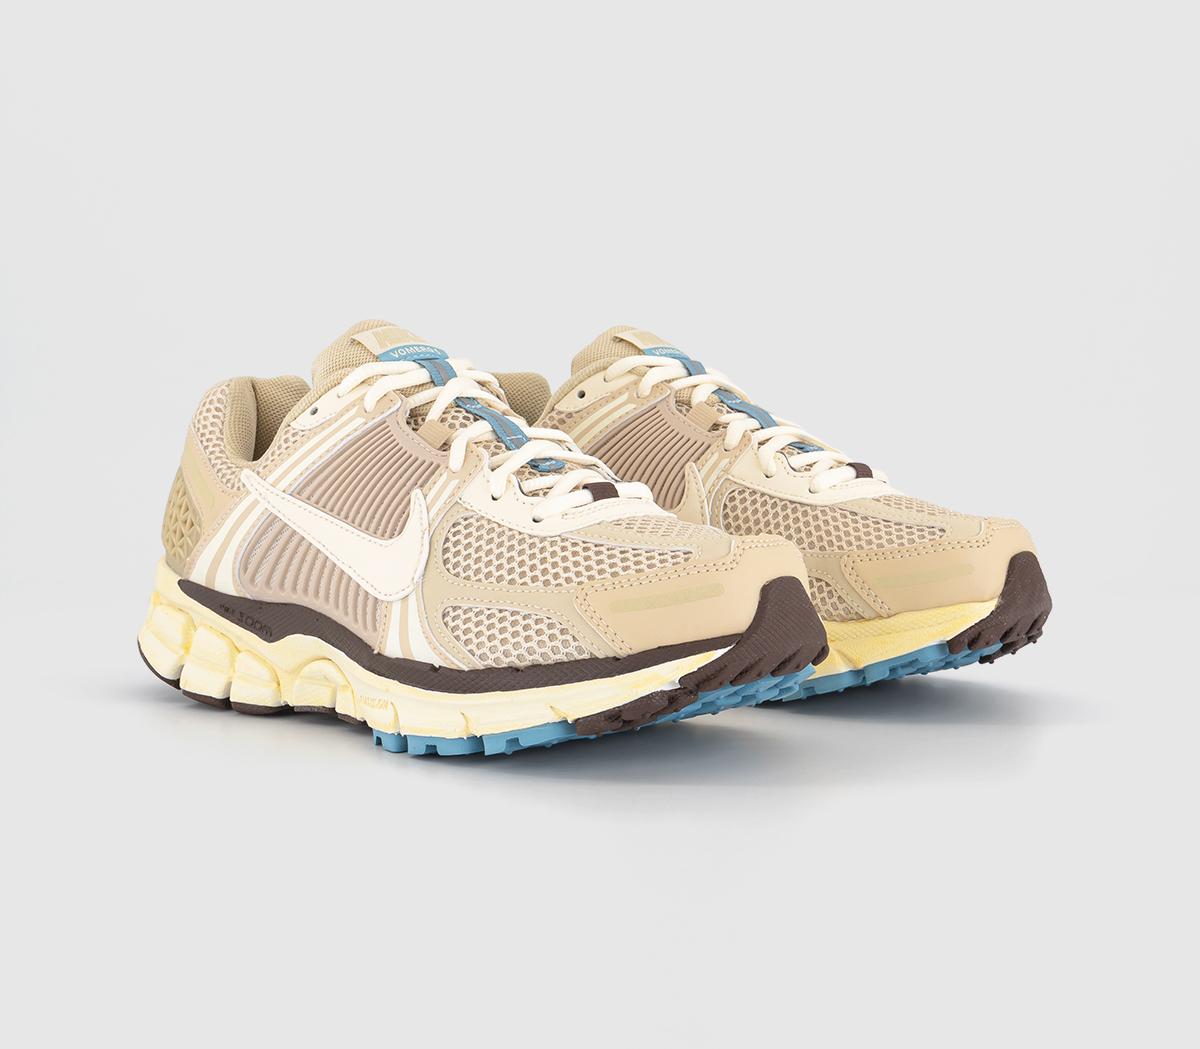 Nike Womens Zoom Vomero 5 Trainers Oatmeal Pale Ivory Sail Light Chocolate Worn Blue Natural, 9